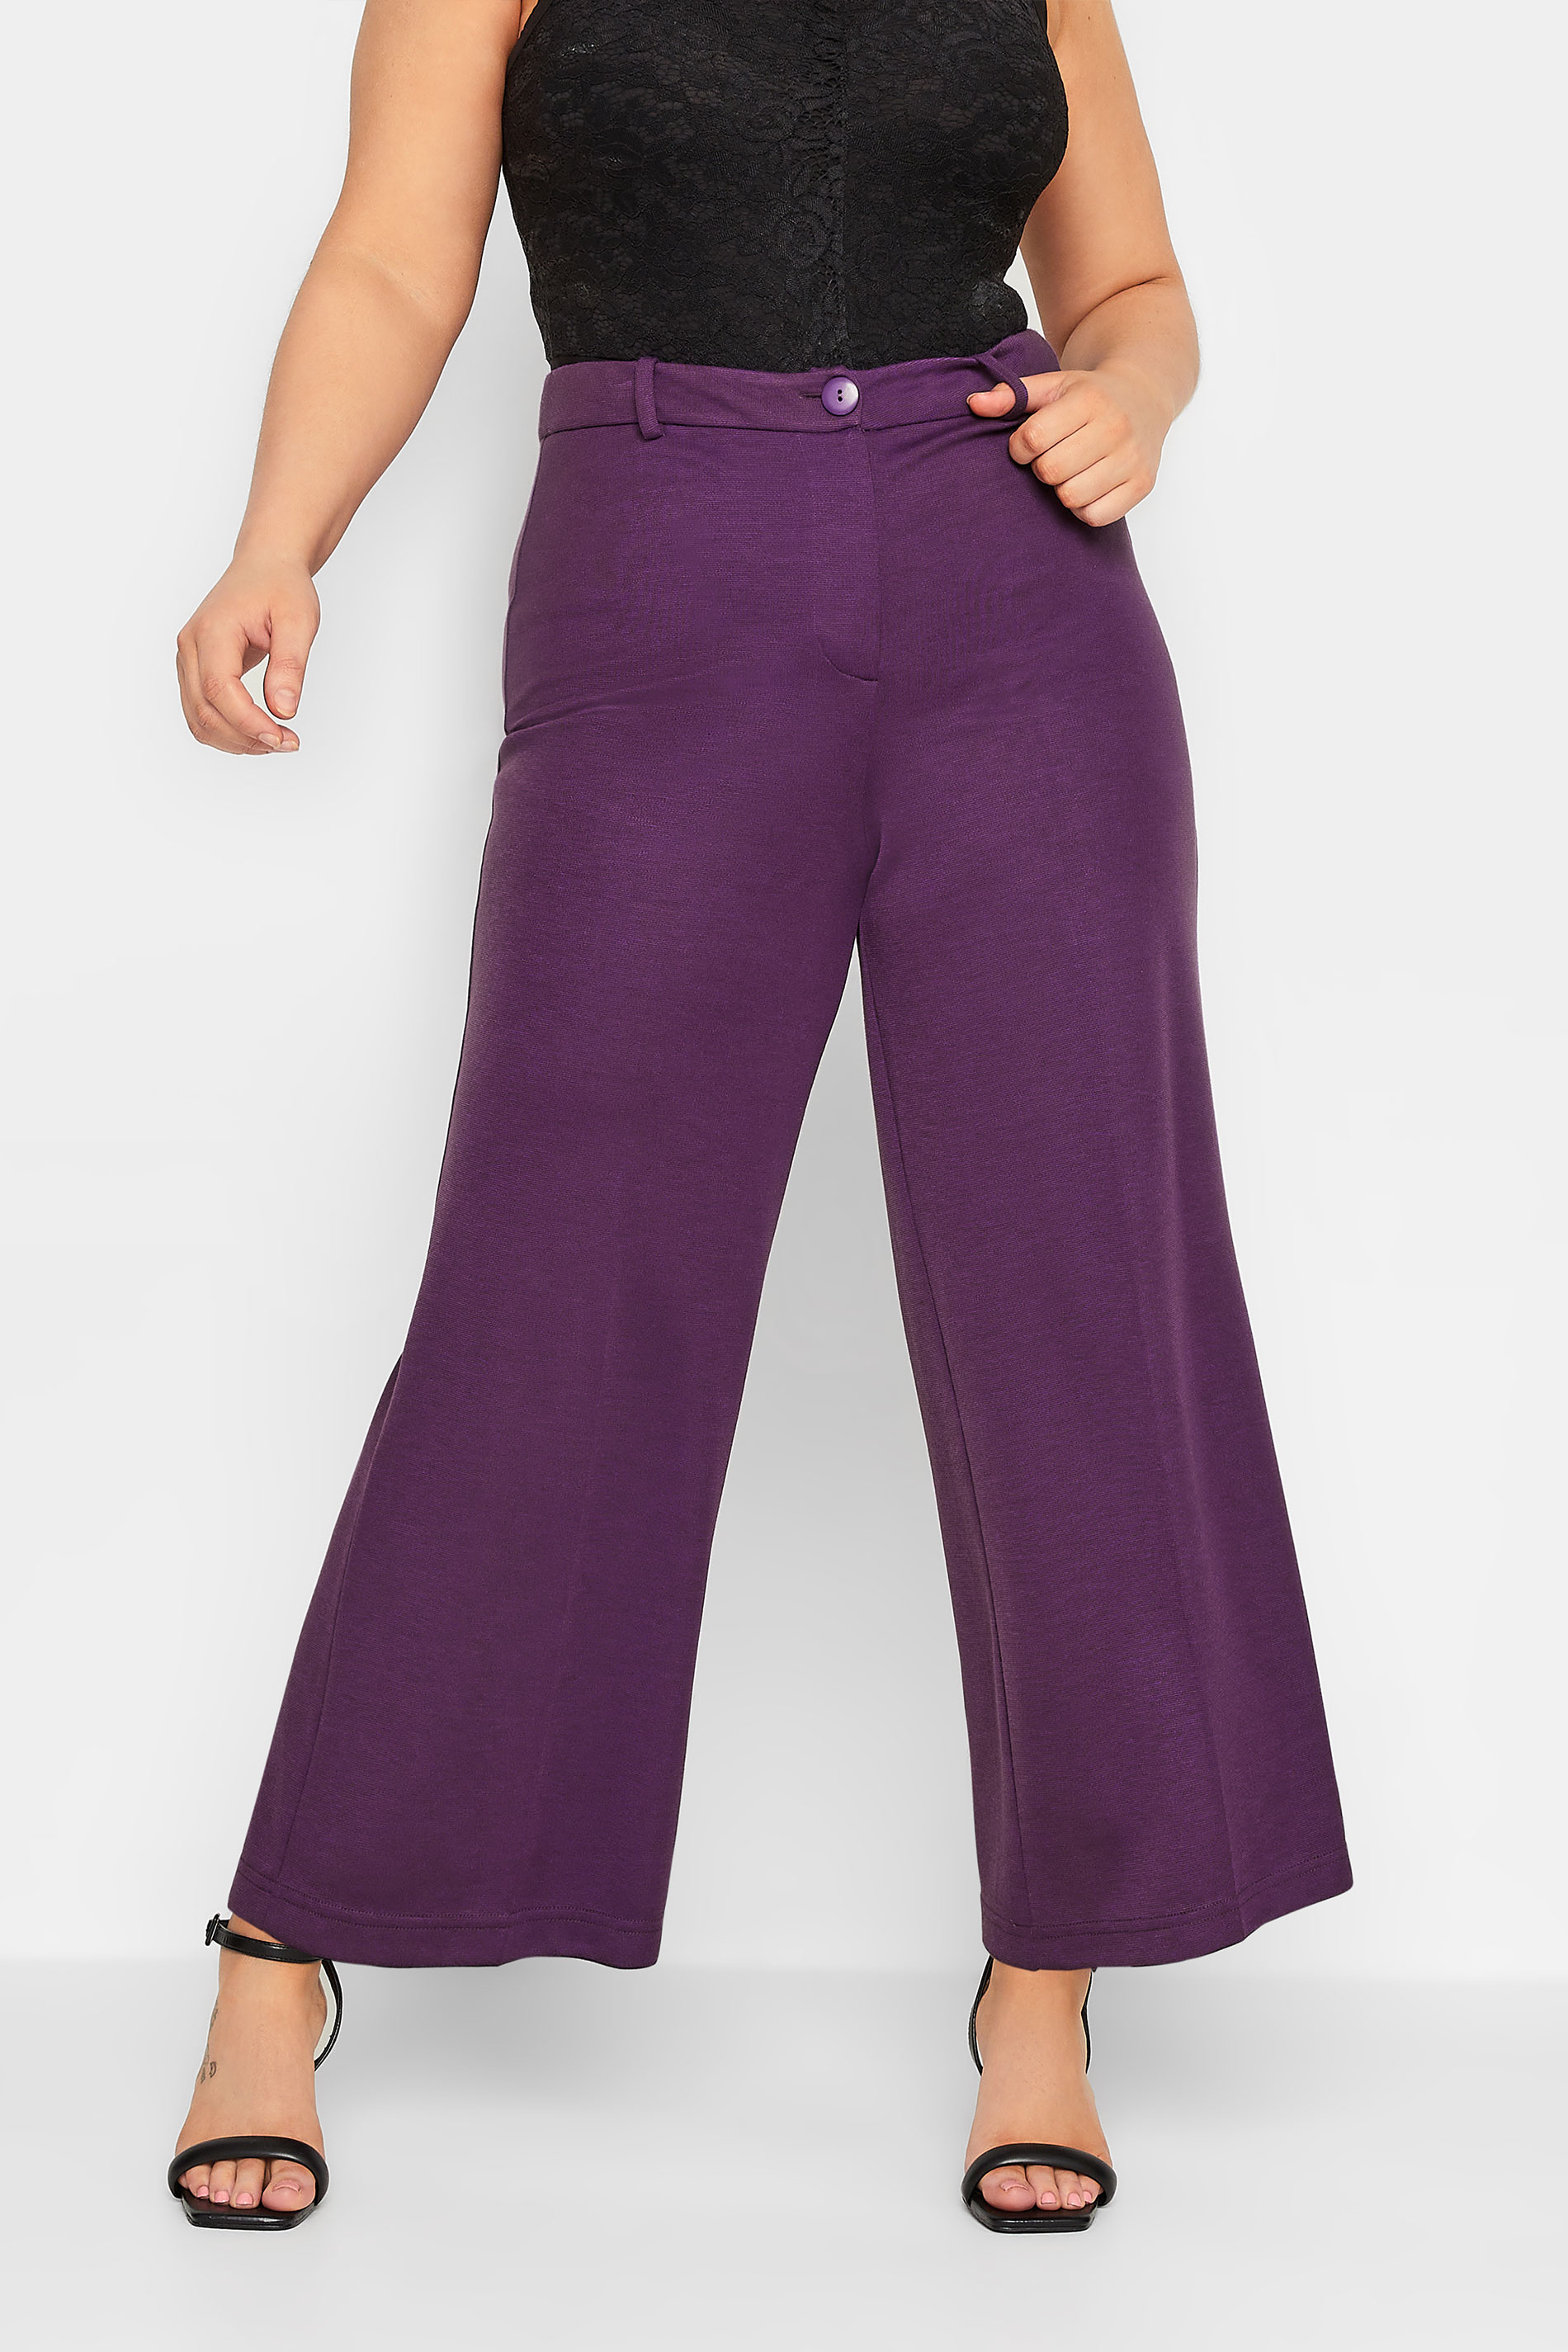 EffortleCloset London's Purple Bootcut Trousers with Wide Leg and Elastic  Waist